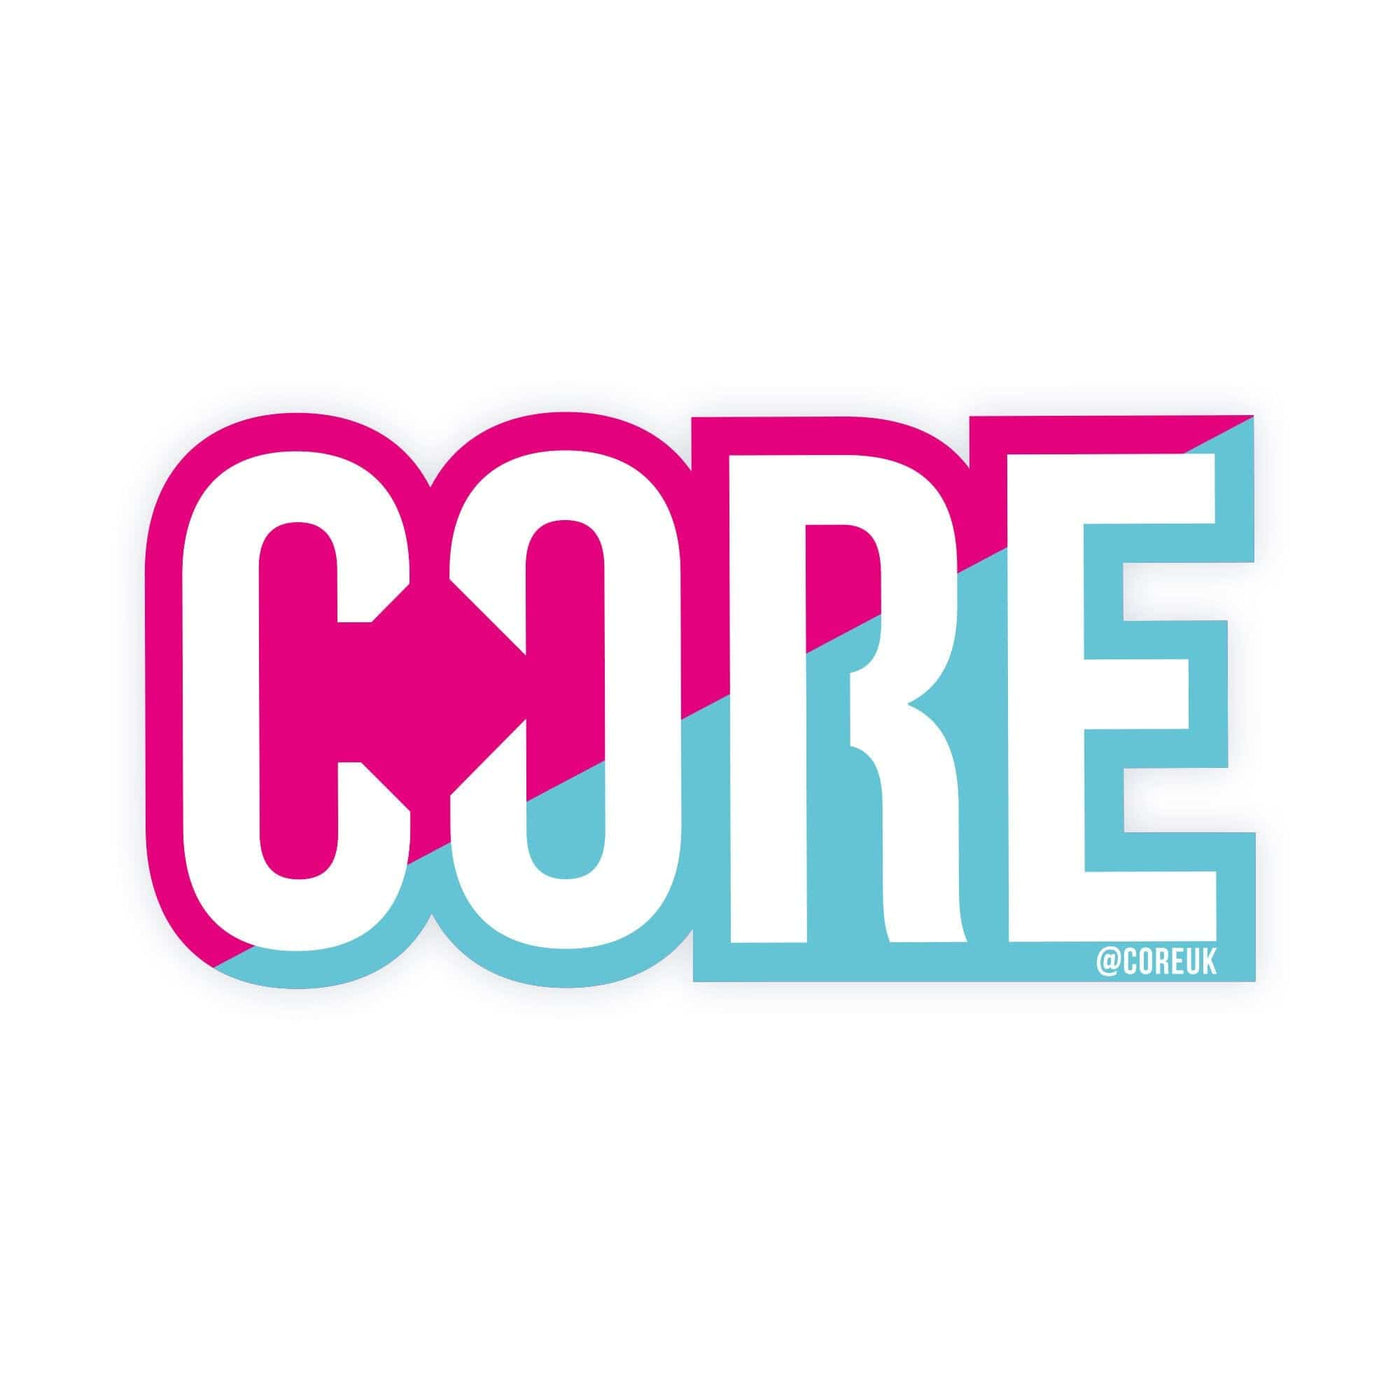 CORE Sticker, Pink/Blue - Refresher - CORE Protection